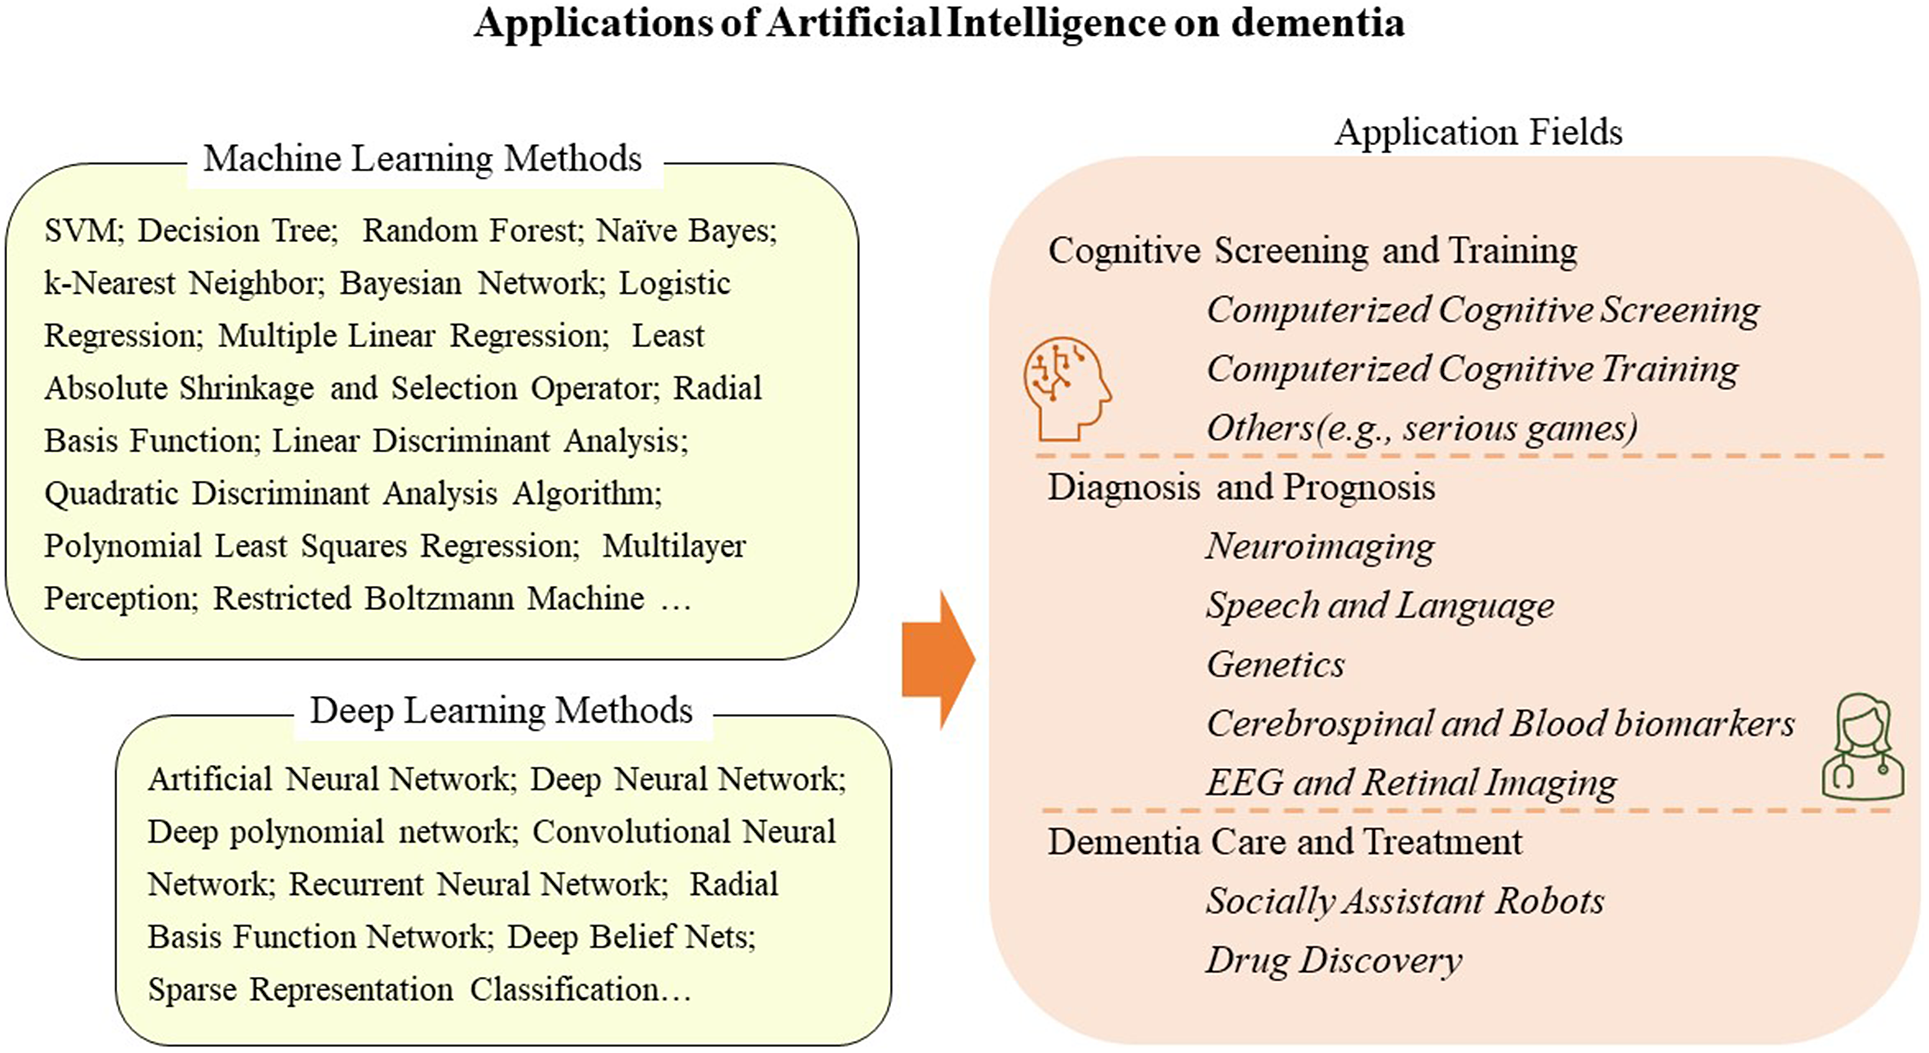 Applications of artificial intelligence in dementia research